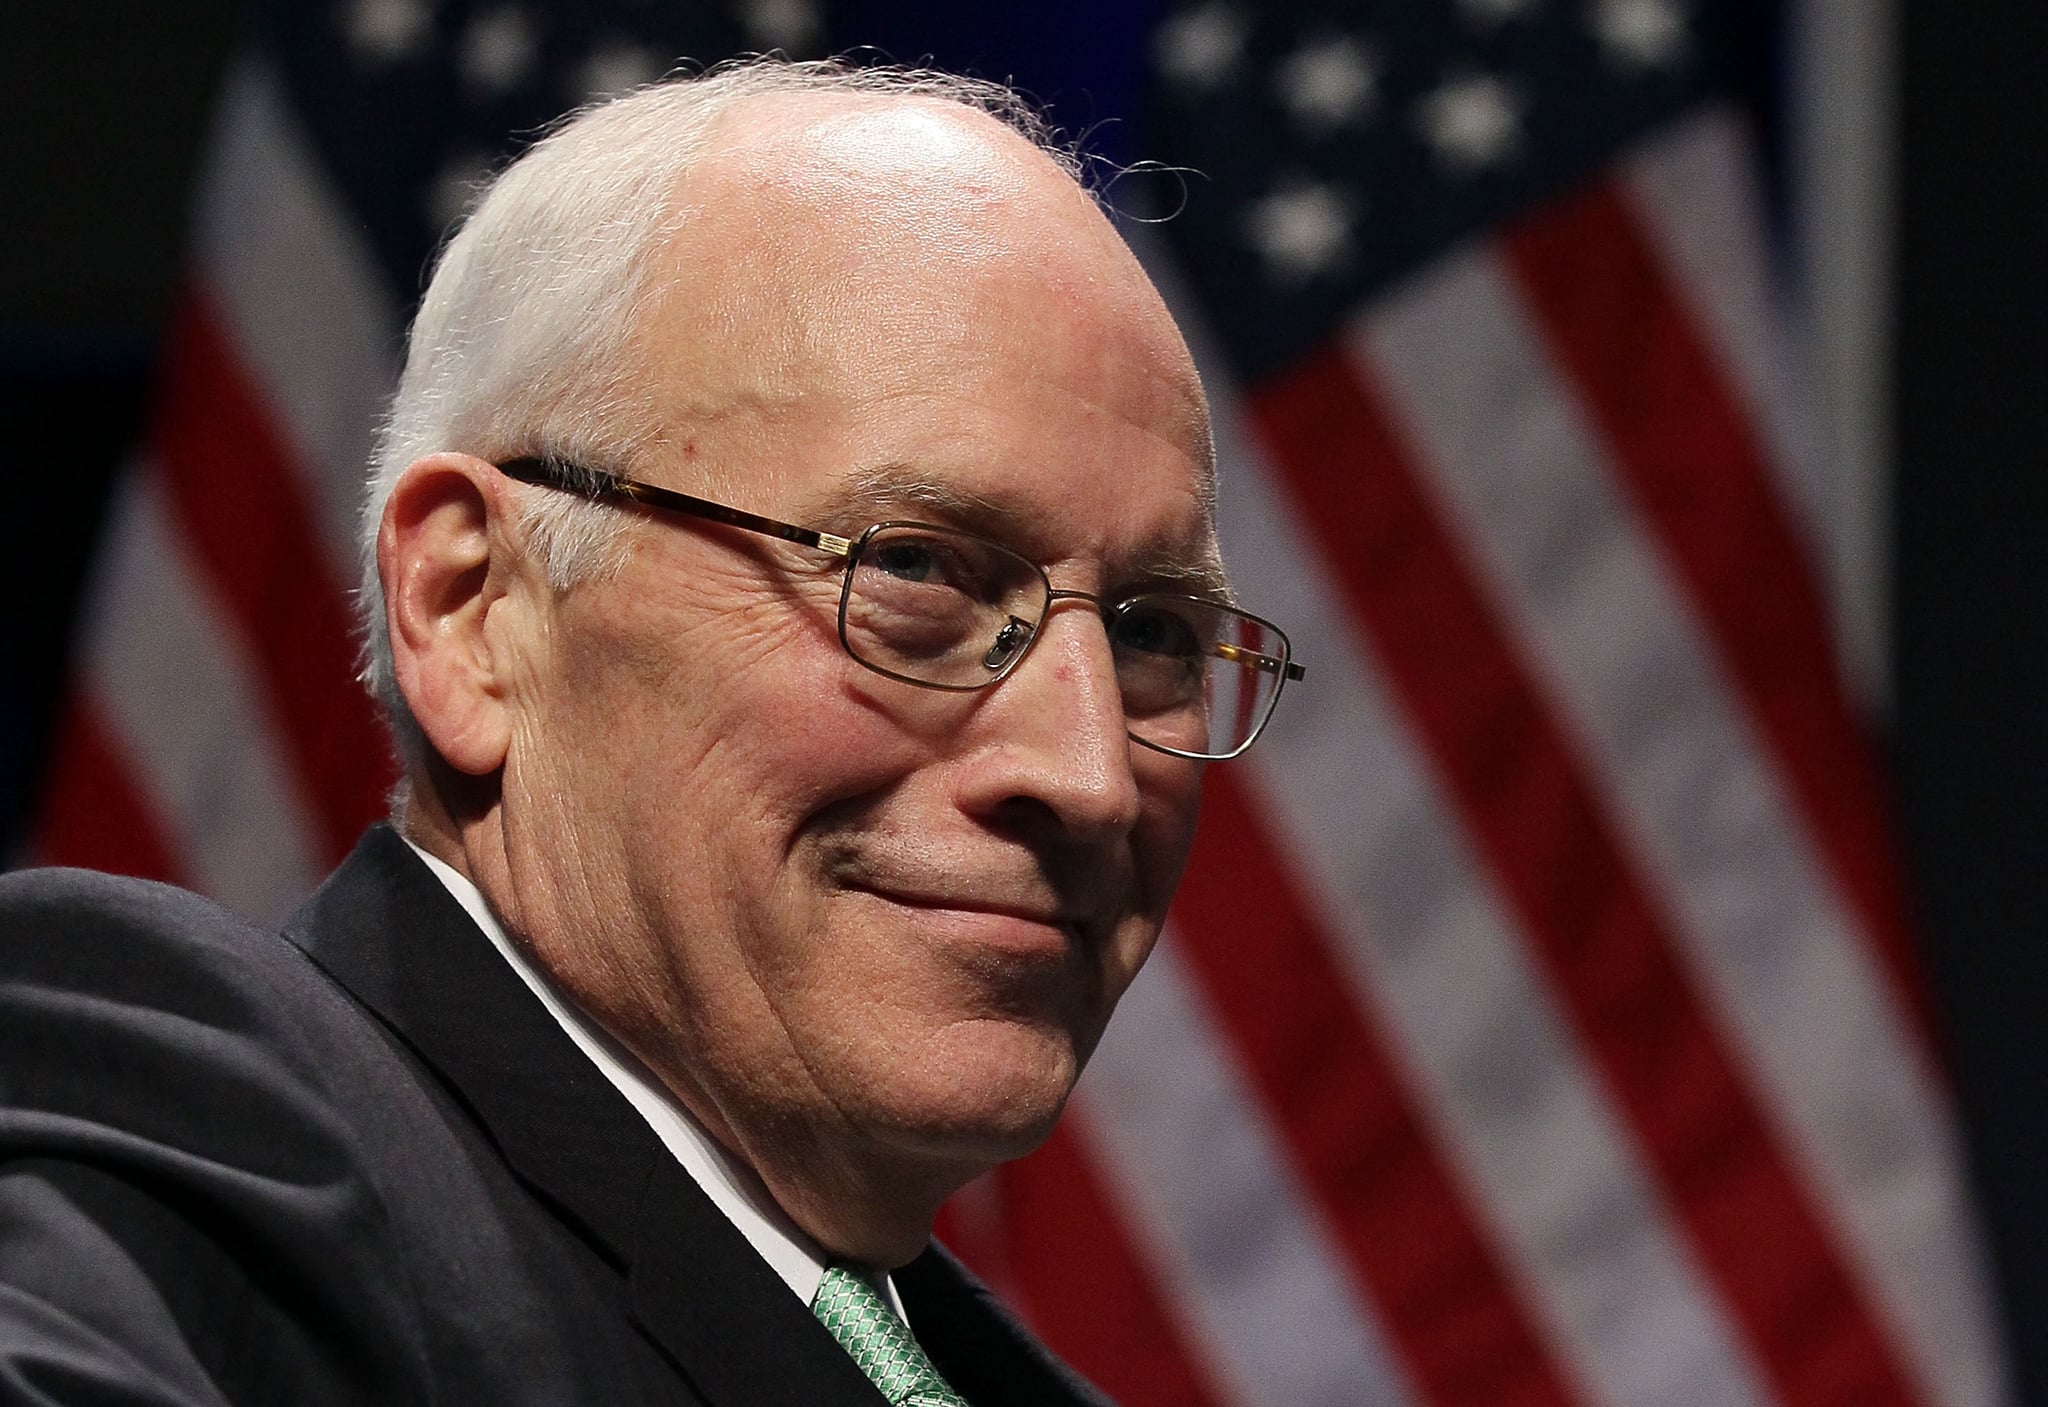 WASHINGTON, DC - FEBRUARY 10:  Former U.S. Vice President Dick Cheney attends the Conservative Political Action conference (CPAC), on February 10, 2011 in Washington, DC. The CPAC annual gathering is a project of the American Conservative Union.  (Photo by Mark Wilson/Getty Images)